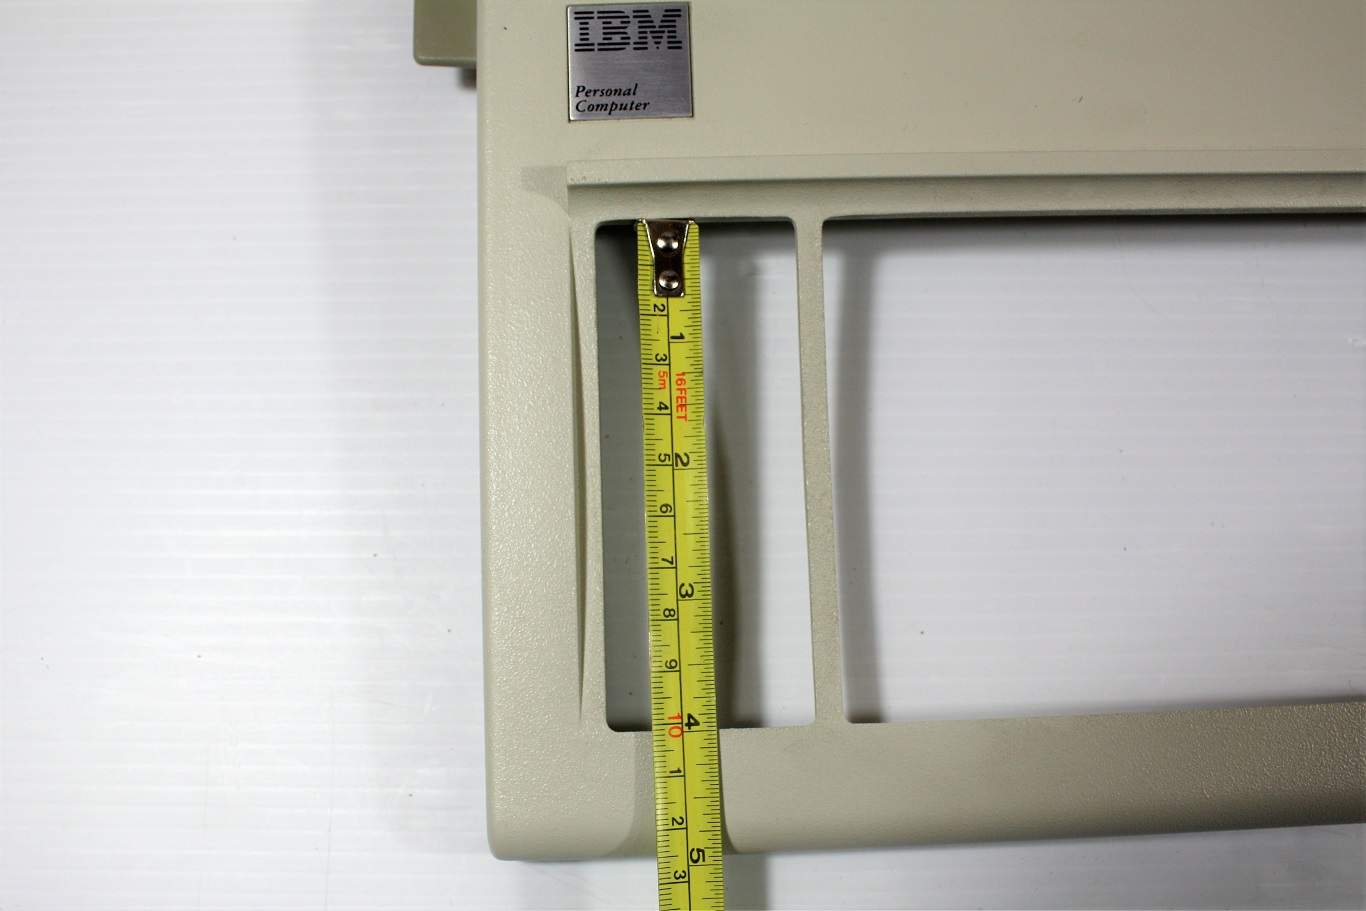 Measurements of the normal XT opening is about 4 inches or about 10 cm and allows the Model F keys to move freely.